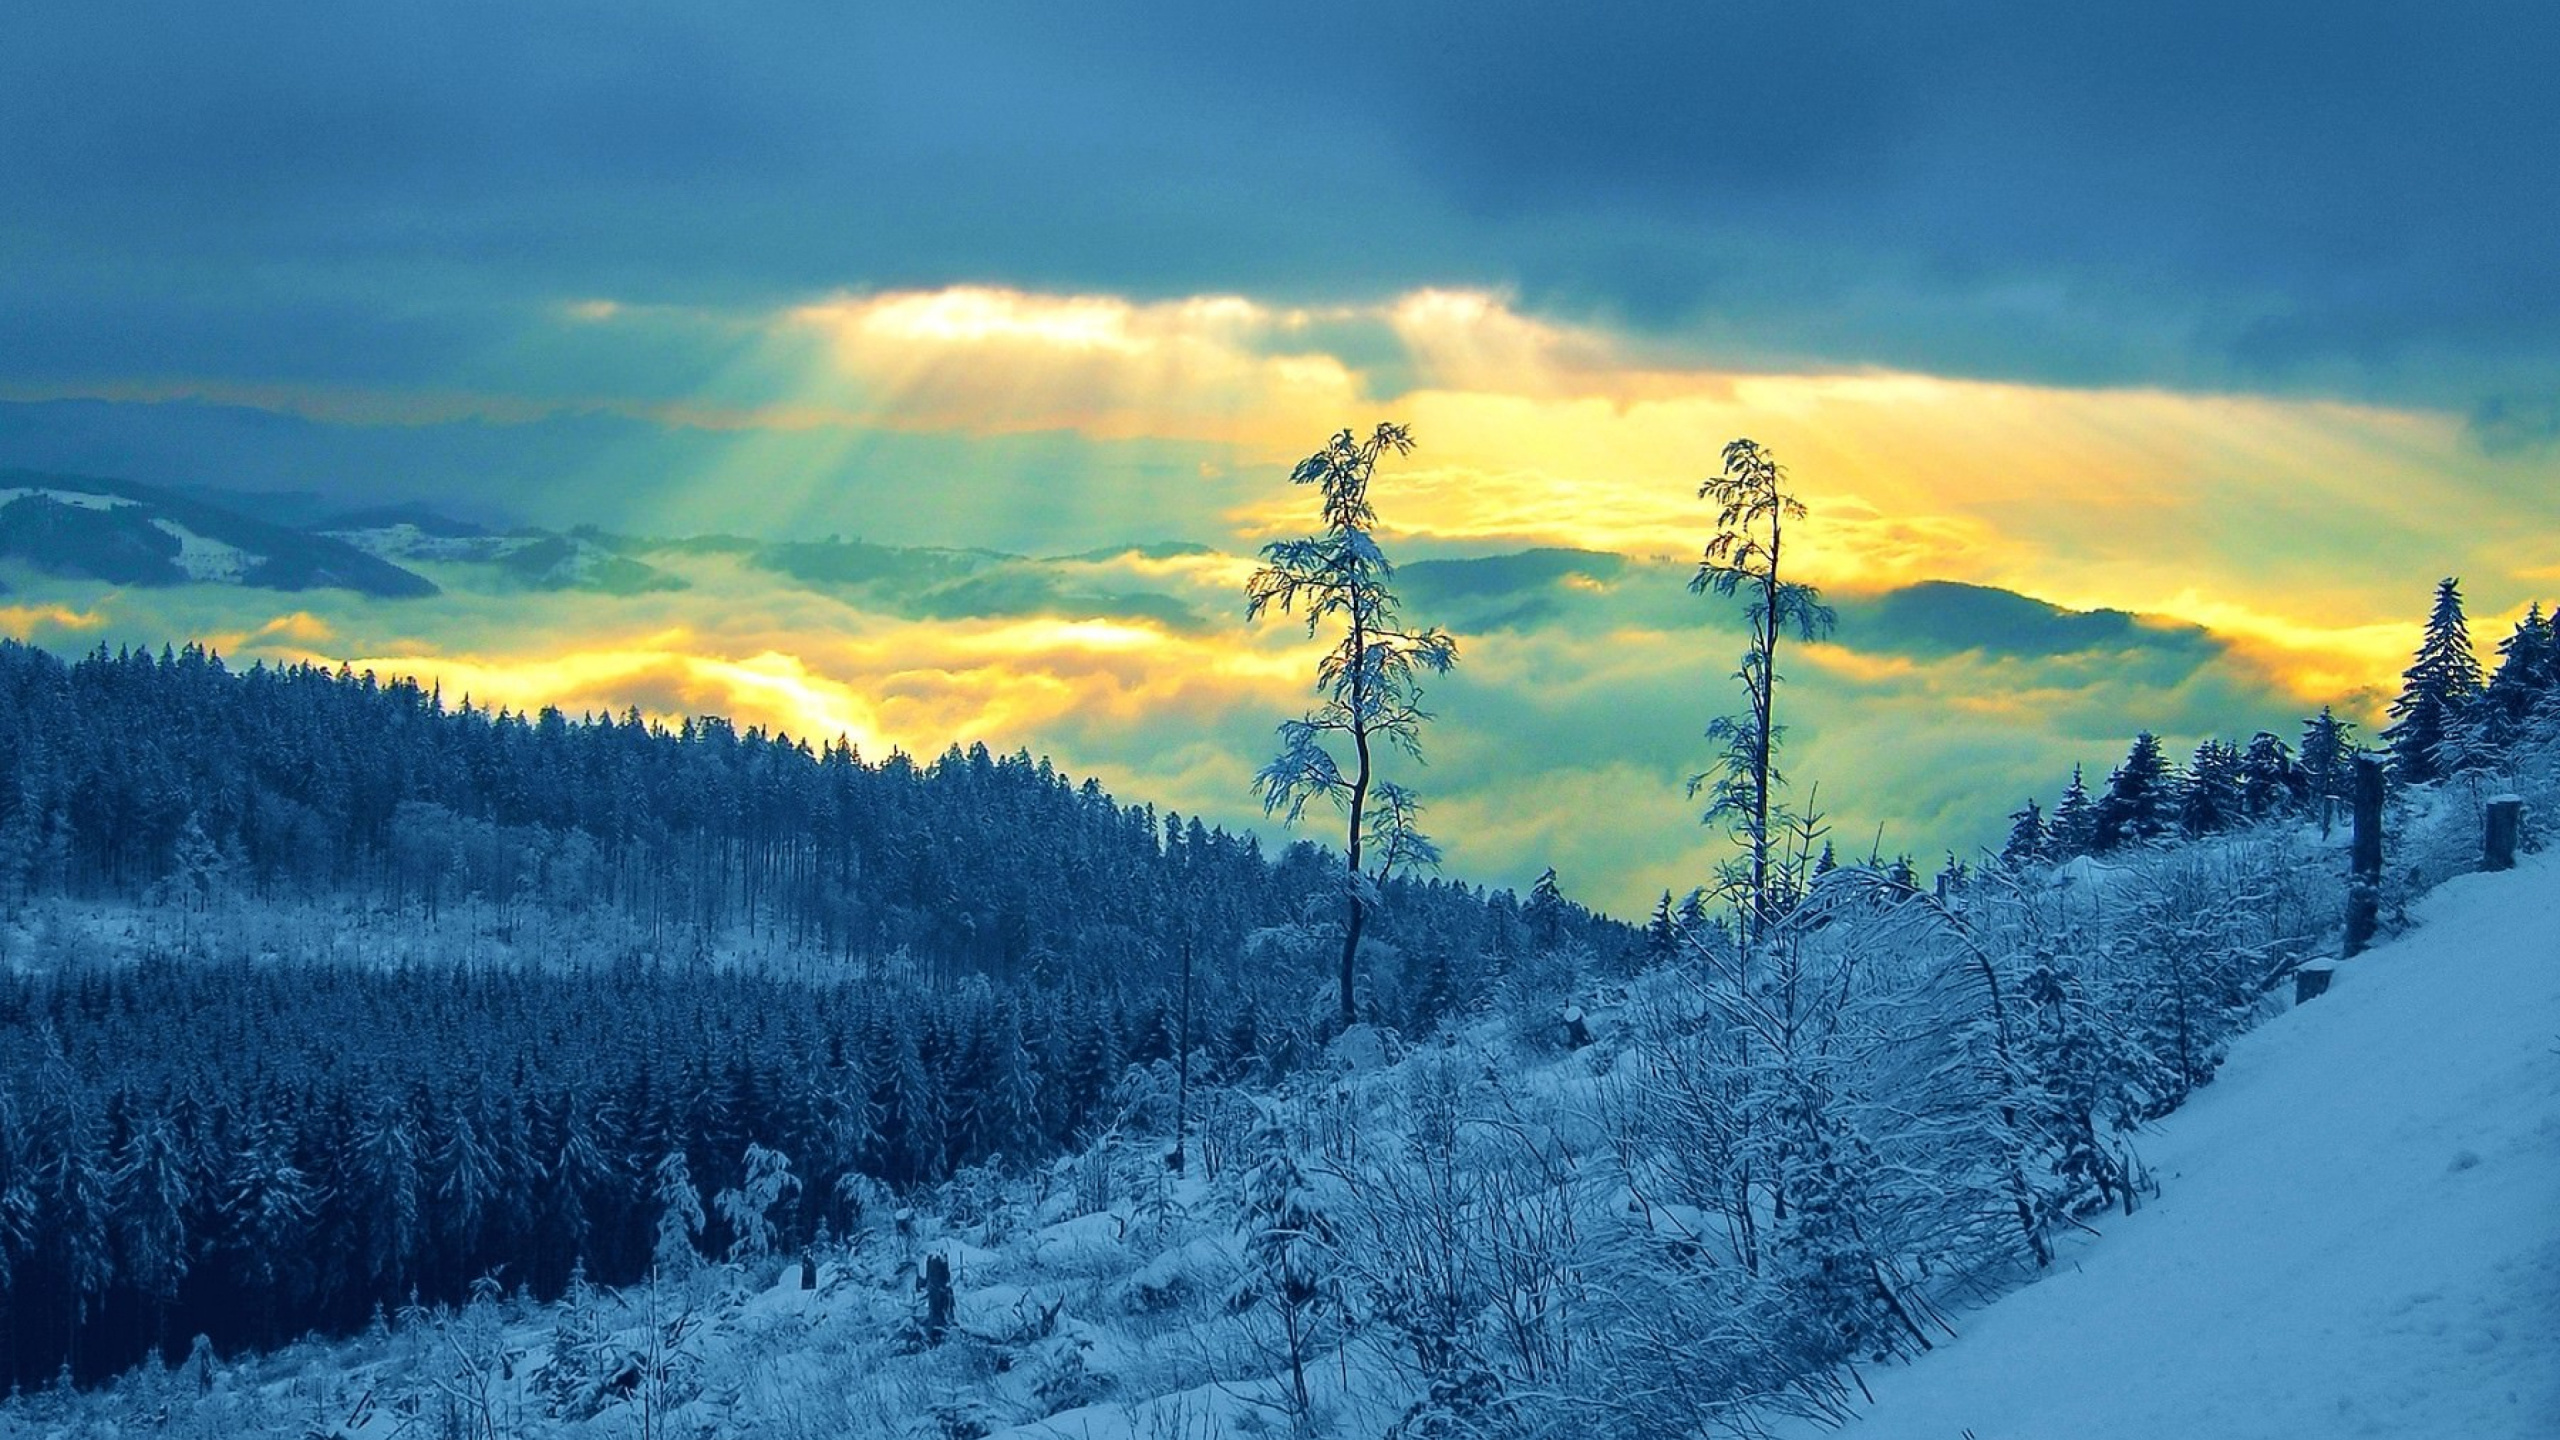 Snow Covered Trees Under Cloudy Sky During Daytime. Wallpaper in 2560x1440 Resolution